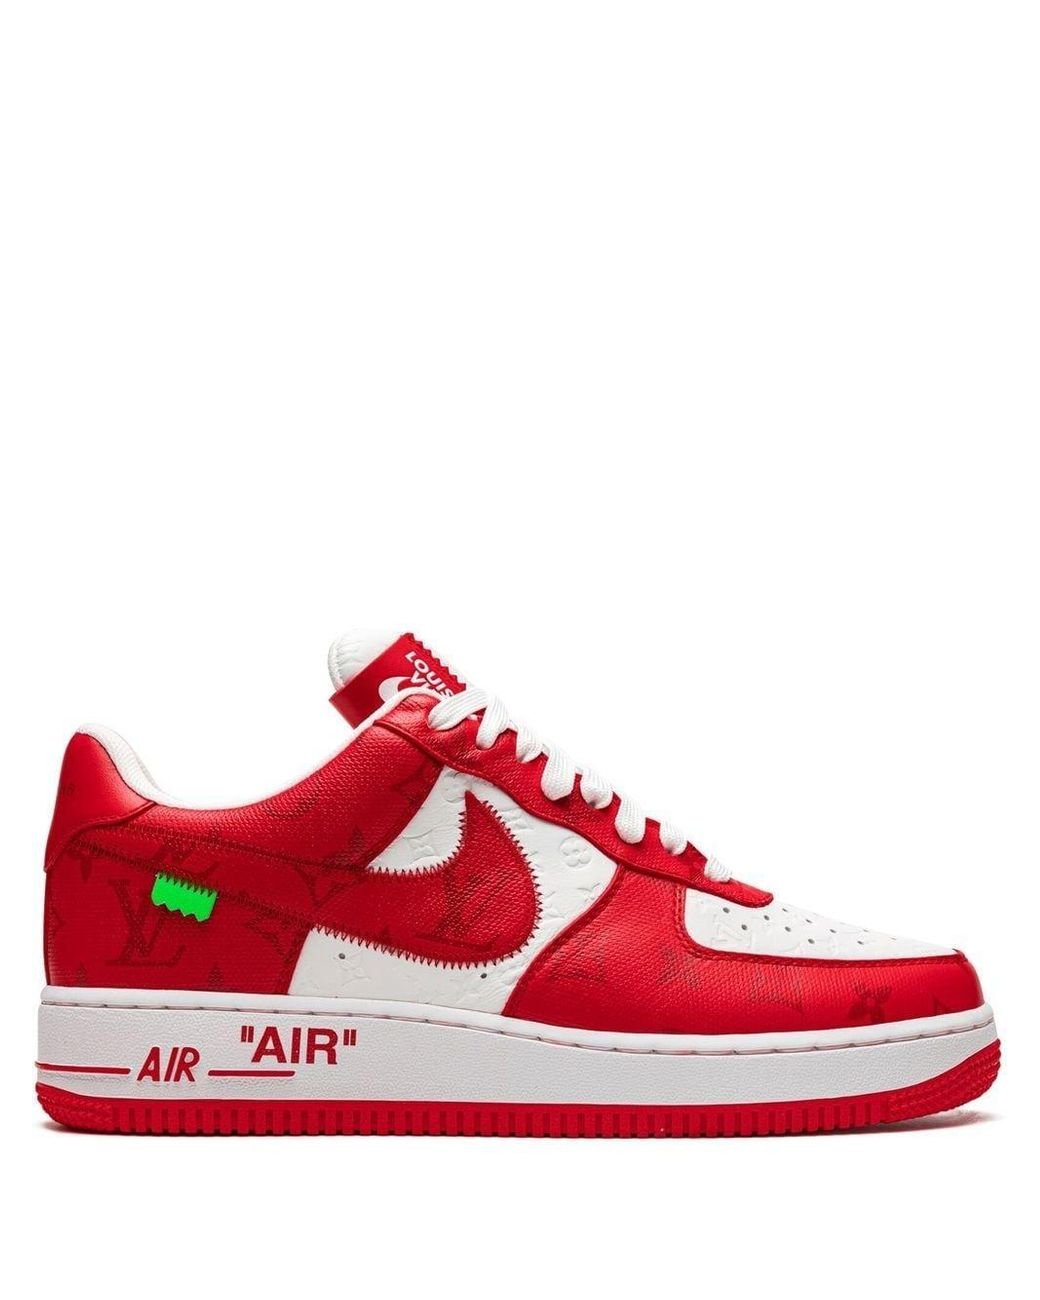 Nike Louis Vuitton Air Force 1 Low virgil Abloh in Red